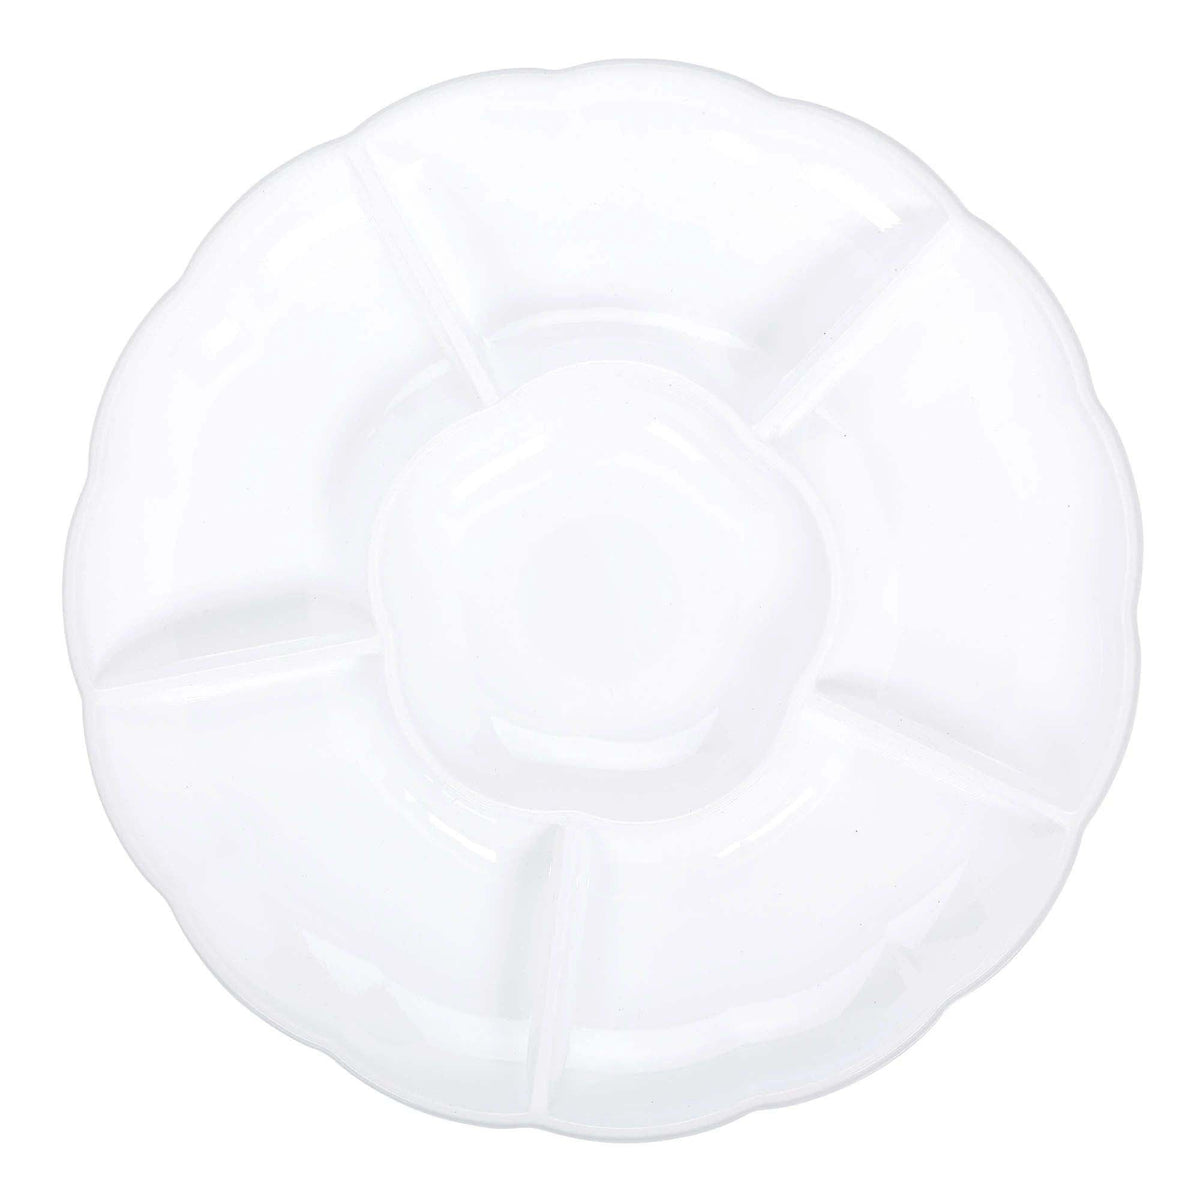 AMSCAN CA Disposable-Plasticware White Recyclable Plastic Tray with Compartment, 16 Inches, 1 Count